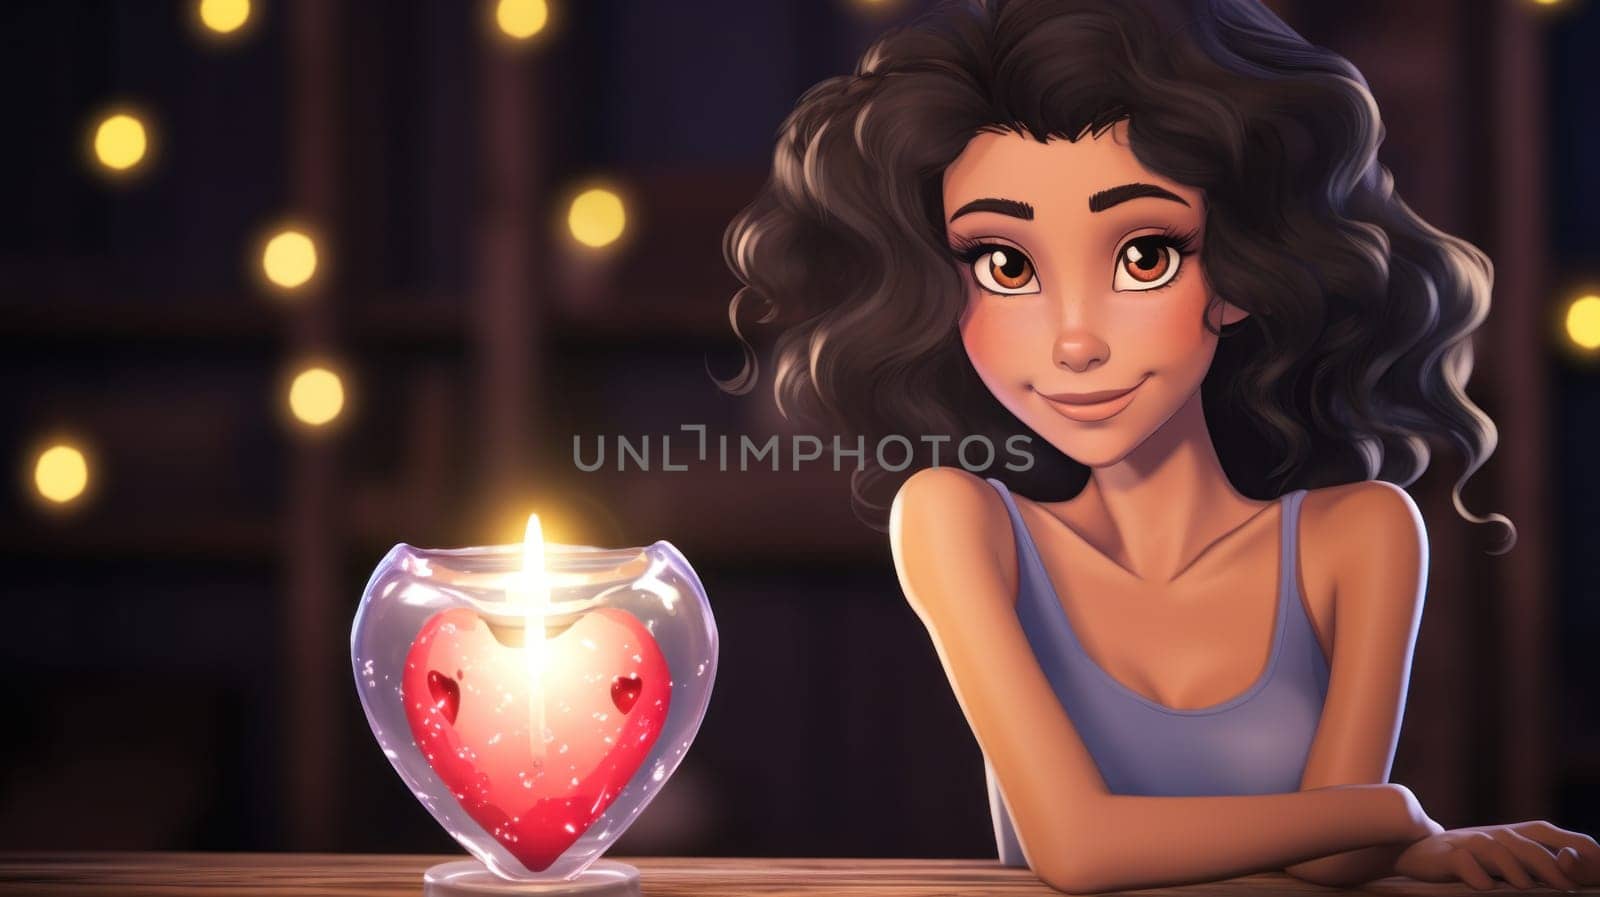 A cartoon girl with long hair sitting at a table next to a candle